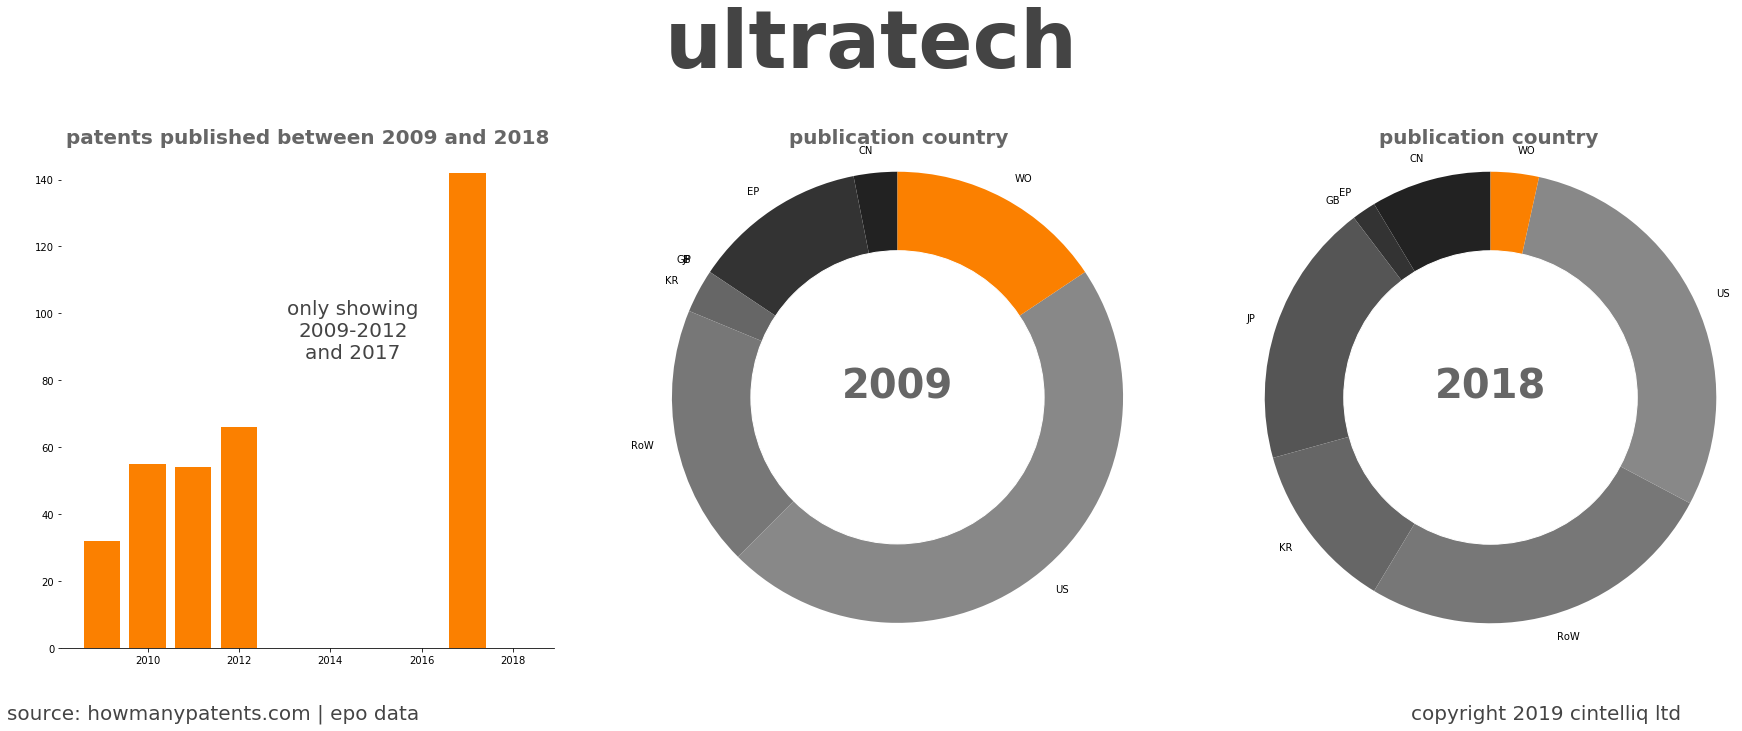 summary of patents for Ultratech